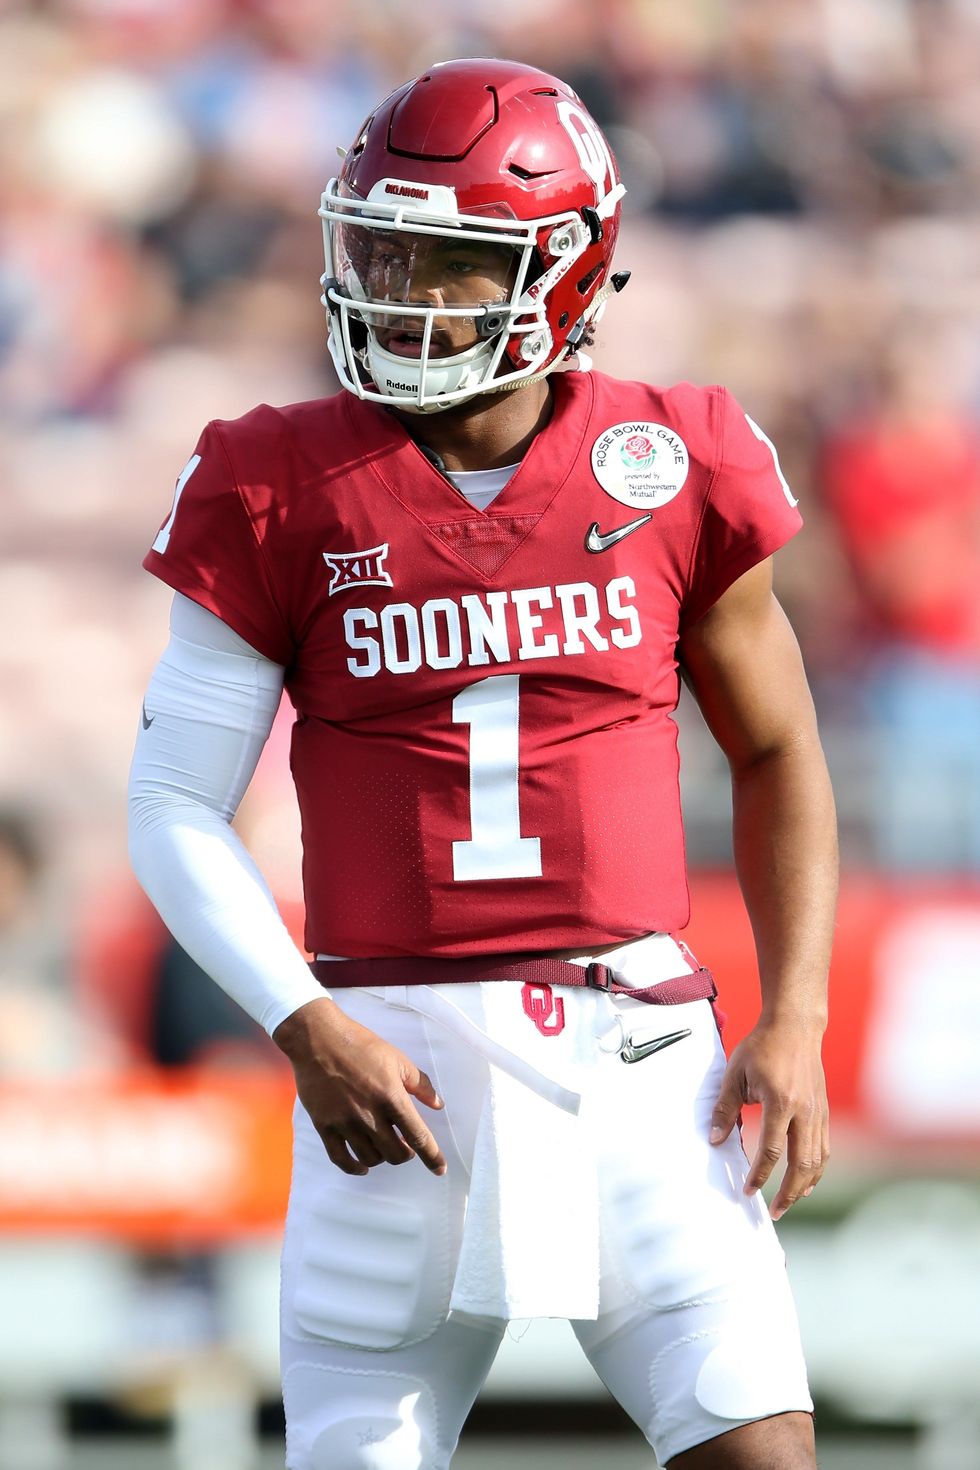 Oklahoma back in action with new life after Big 12 leader West Virginia falls in Week 7